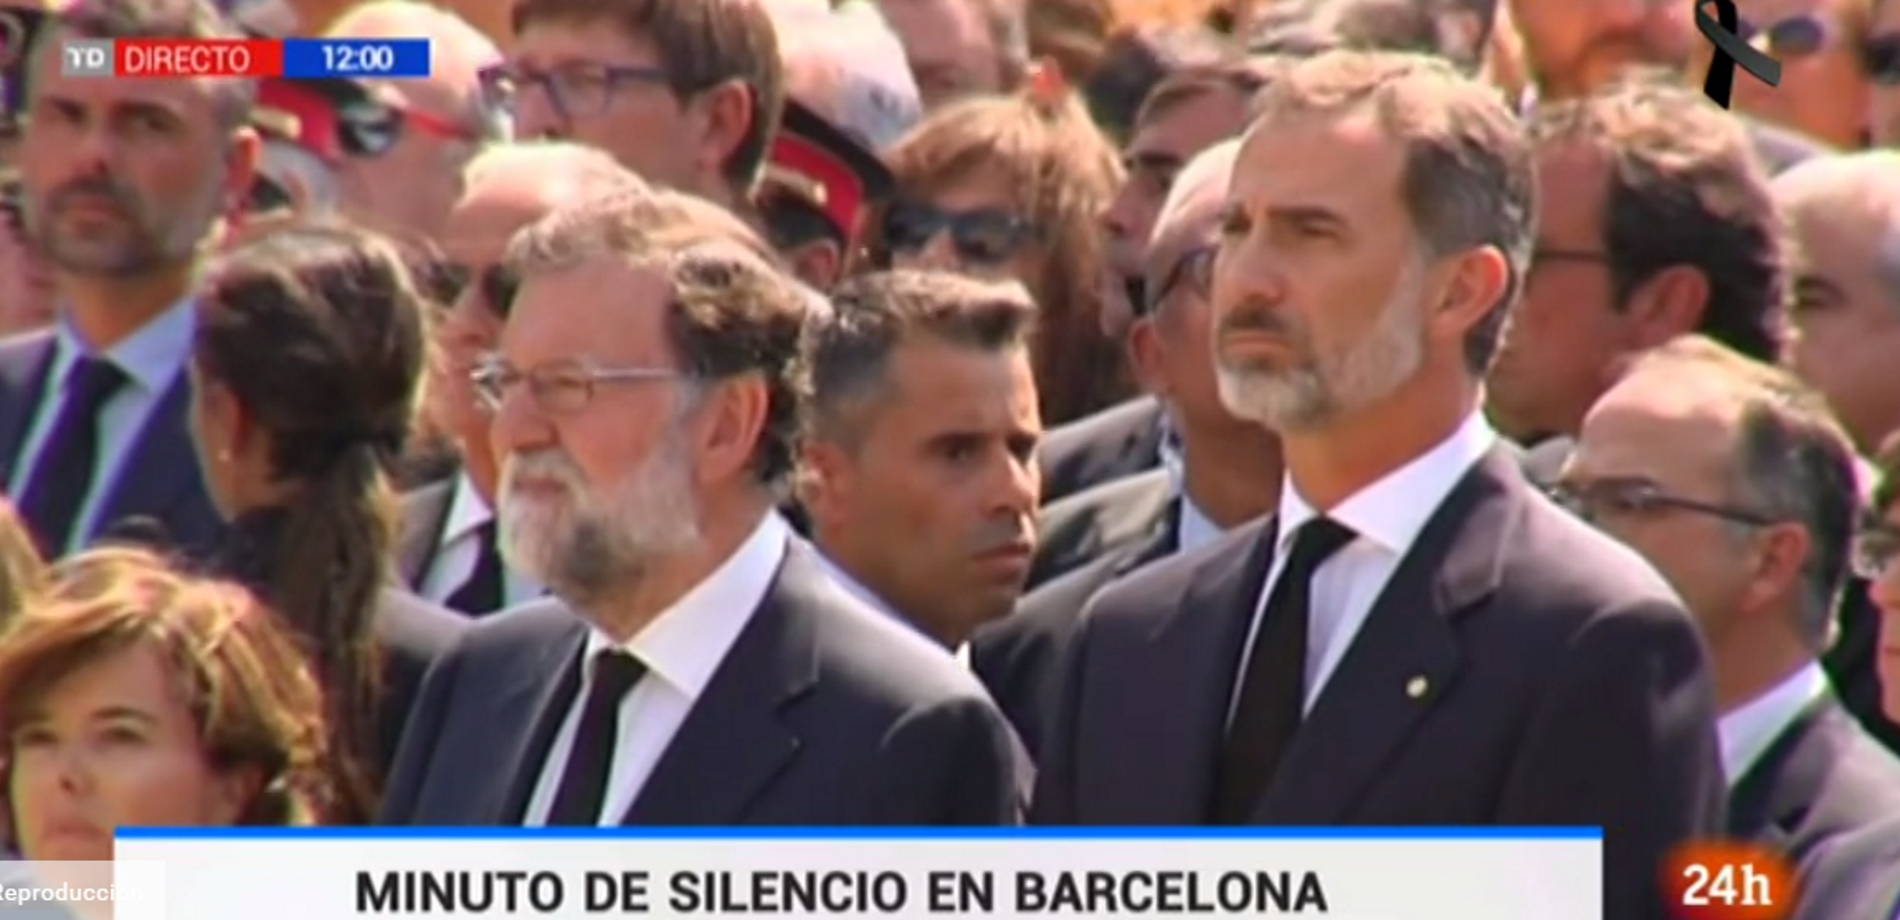 TVE "erases" Puigdemont from the images of the minute's silence tribute